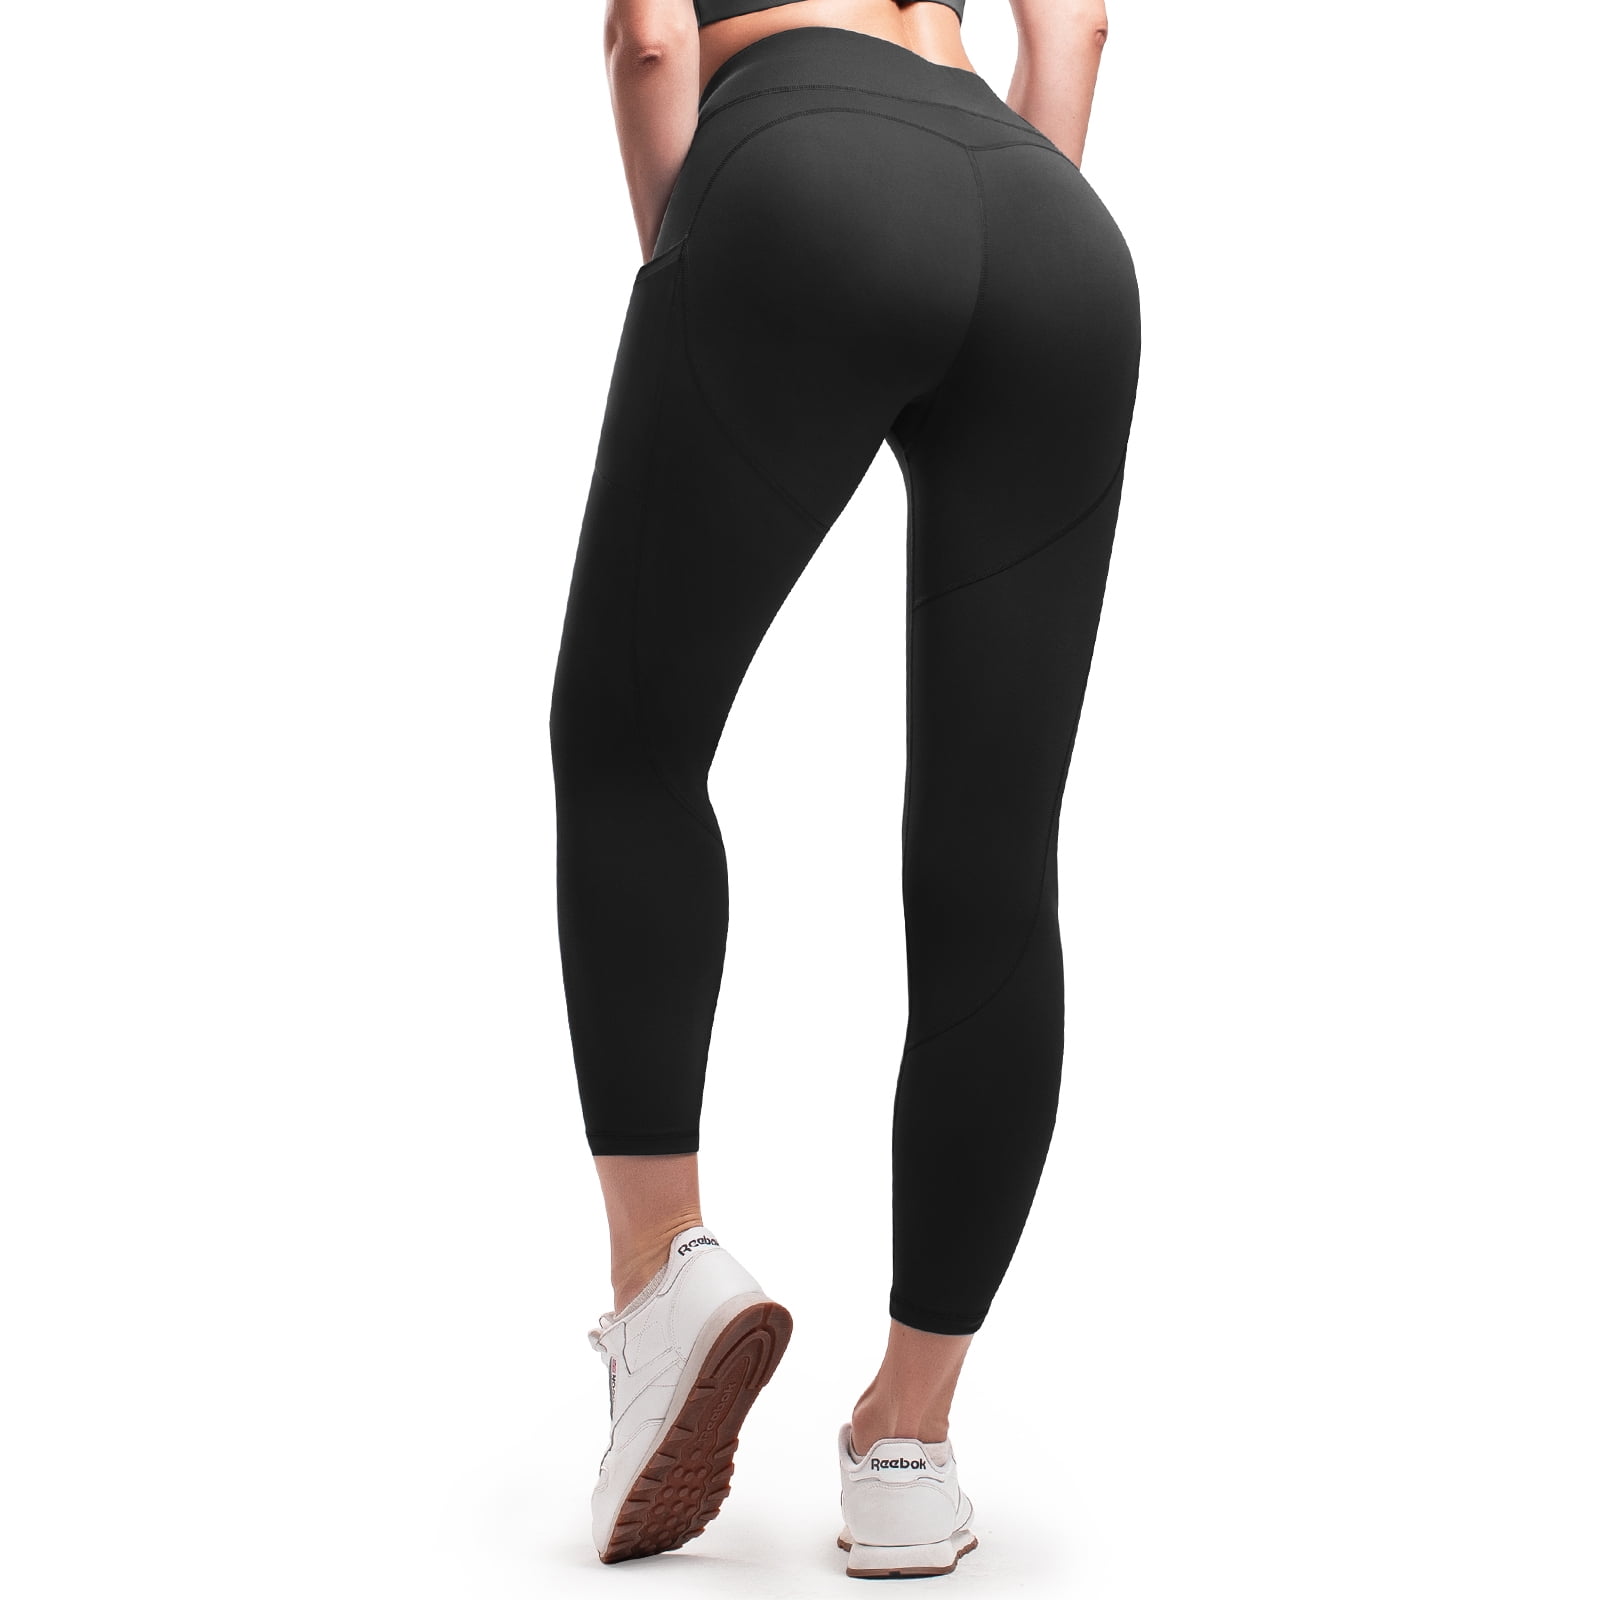 Niksa Yoga Pants,Workout Tights with Pockets for Women M Size 